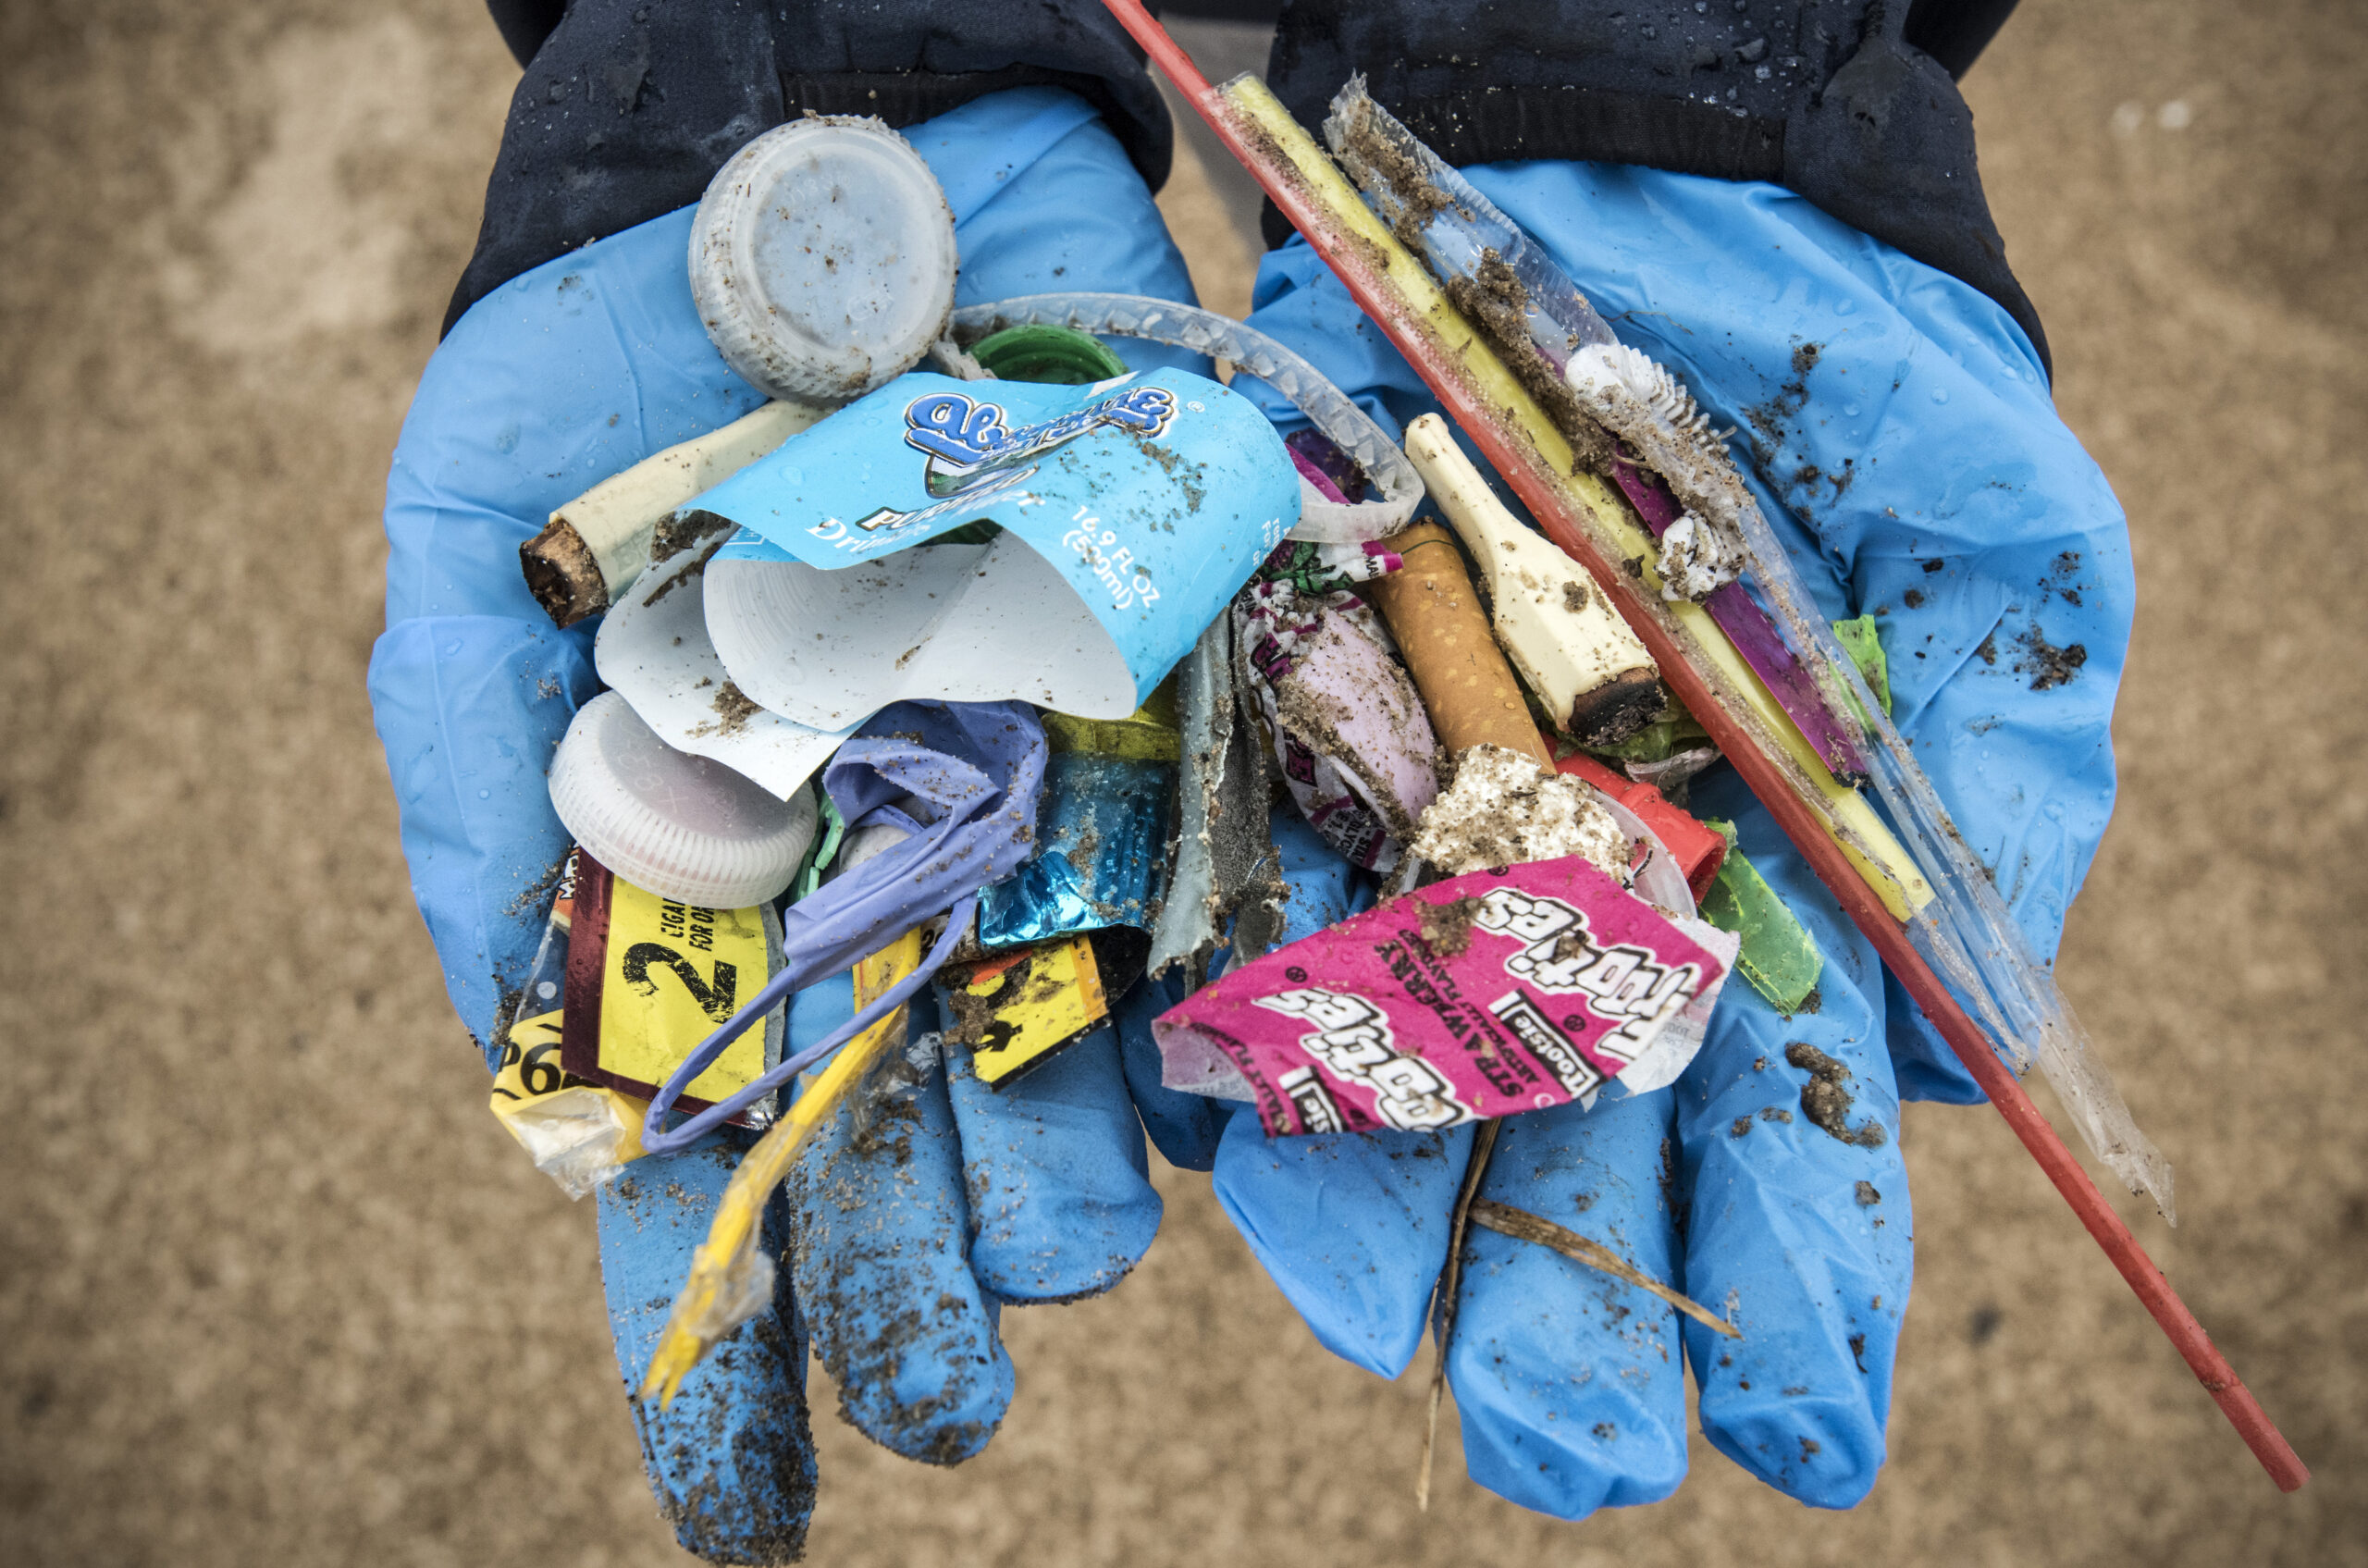 Gloved hands hold bottle caps, food wrappers and other trash found on the beach